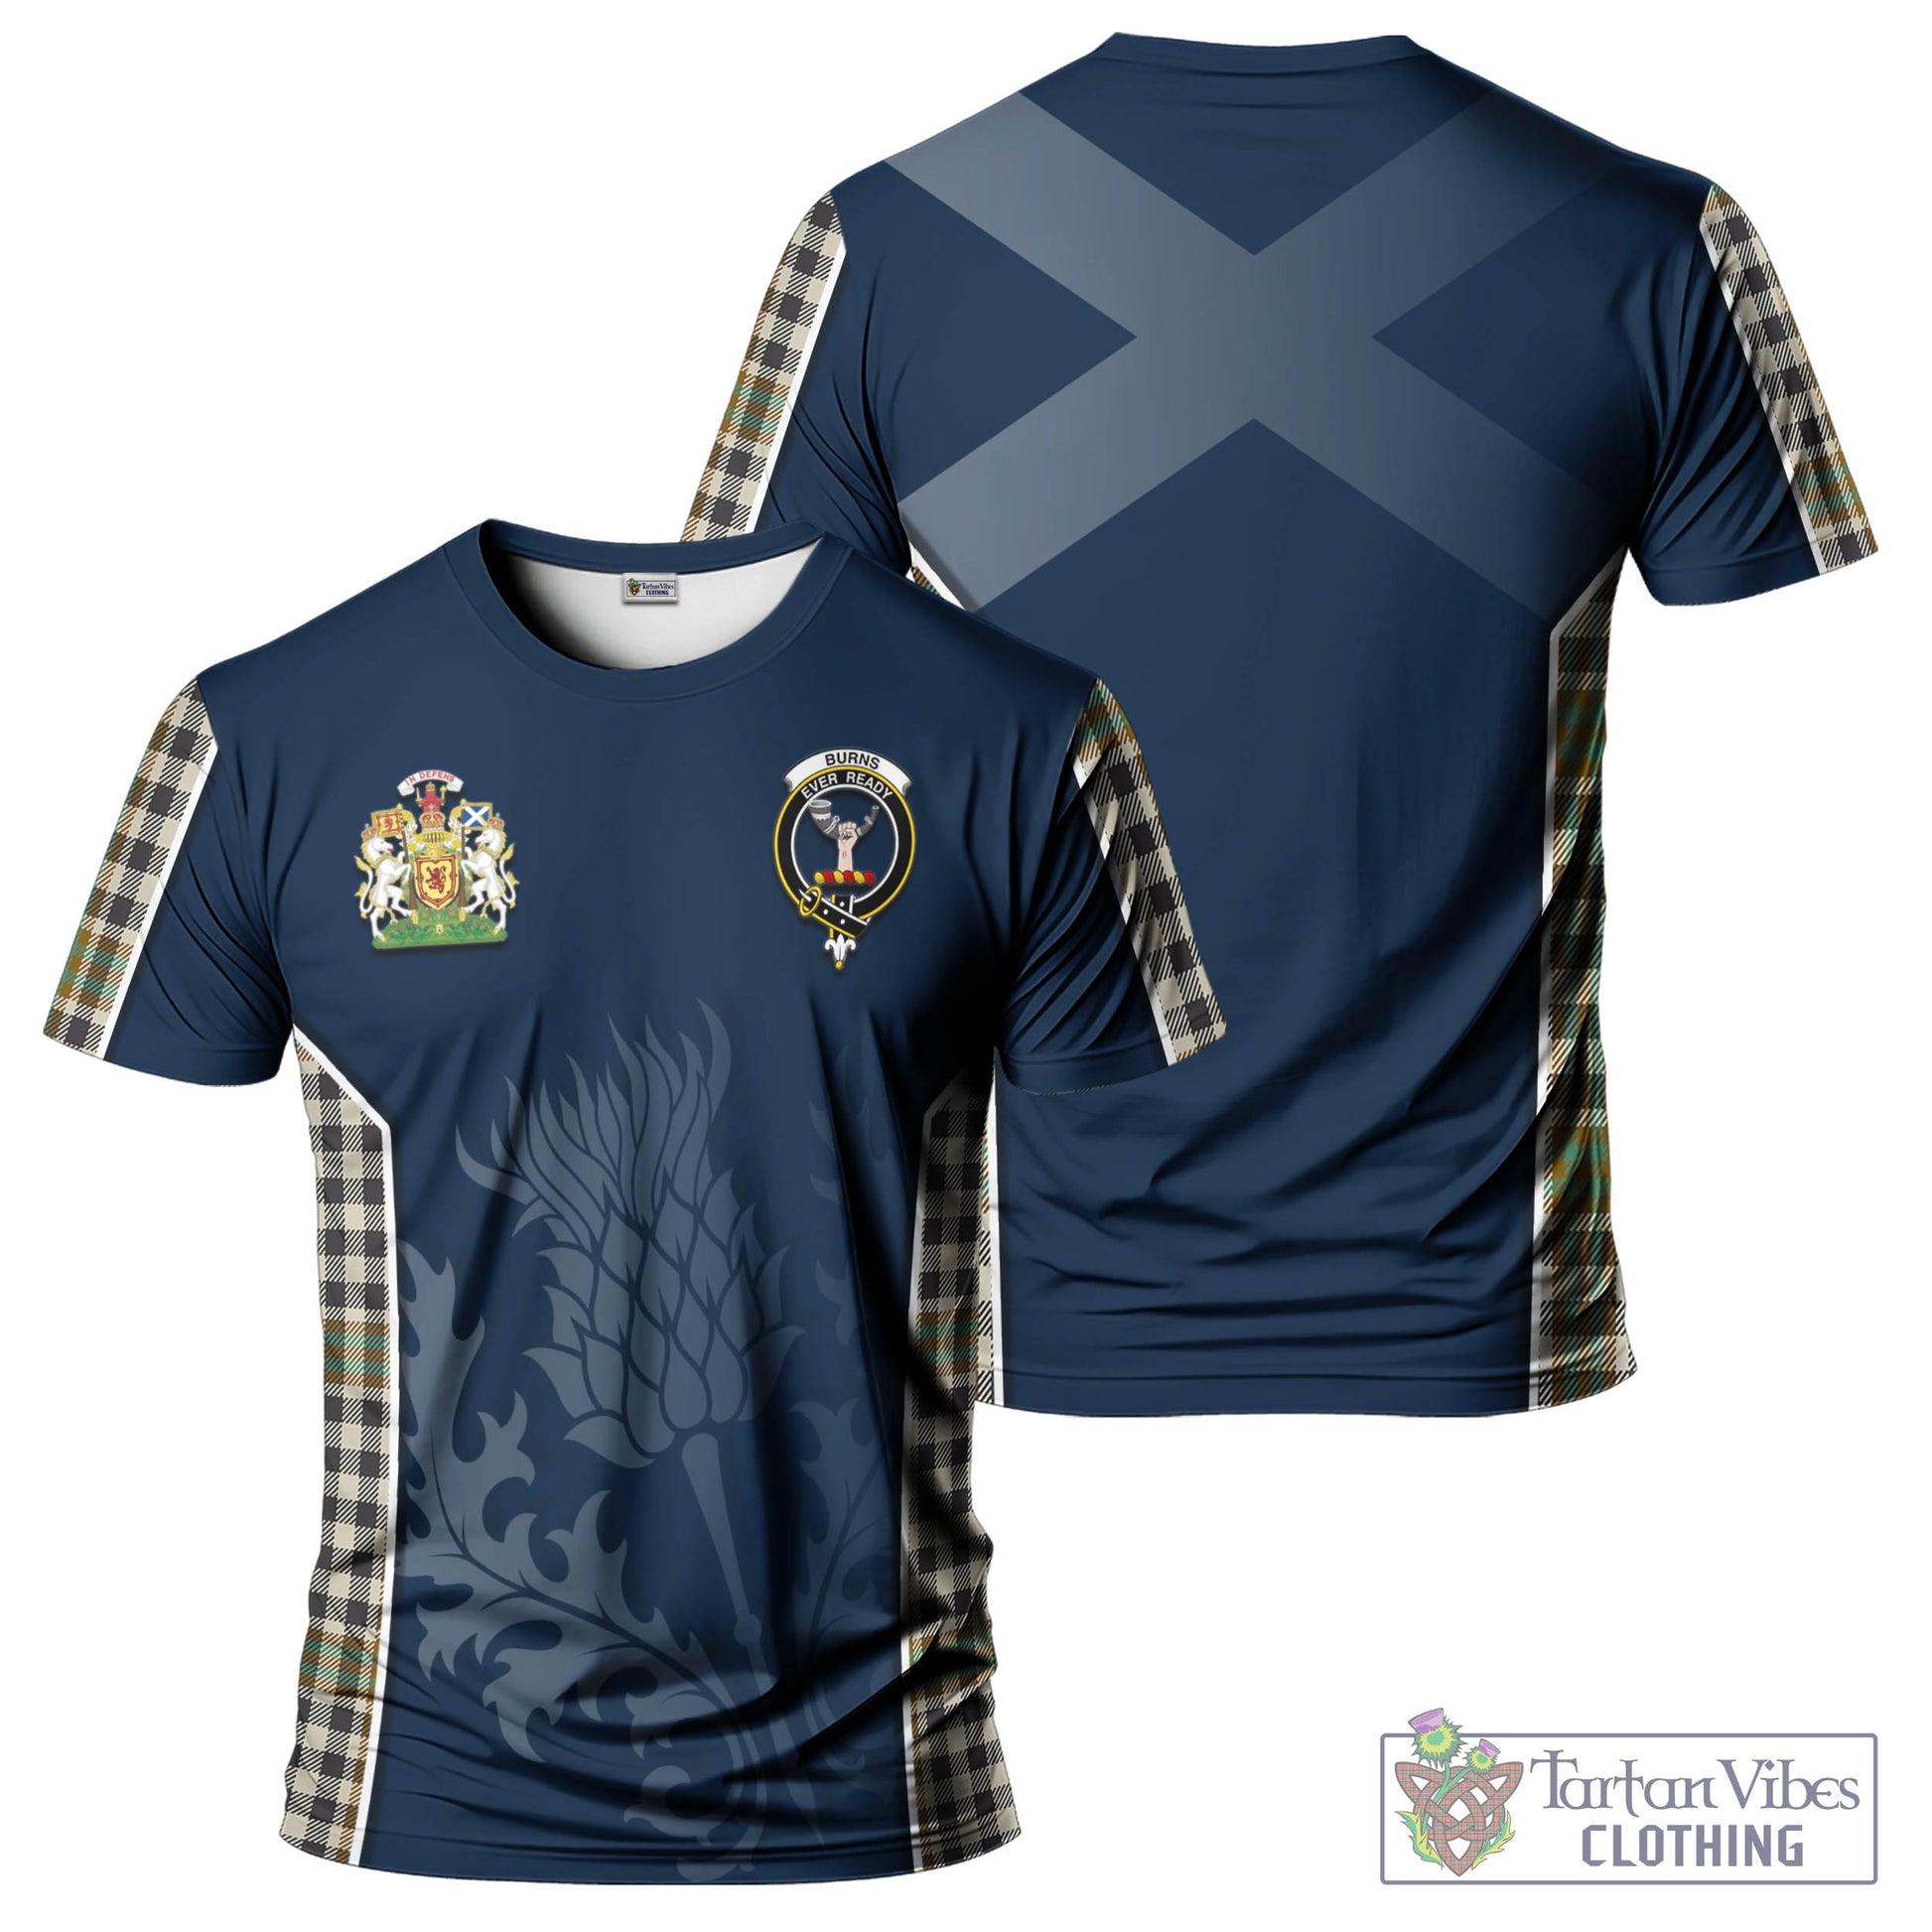 Tartan Vibes Clothing Burns Check Tartan T-Shirt with Family Crest and Scottish Thistle Vibes Sport Style